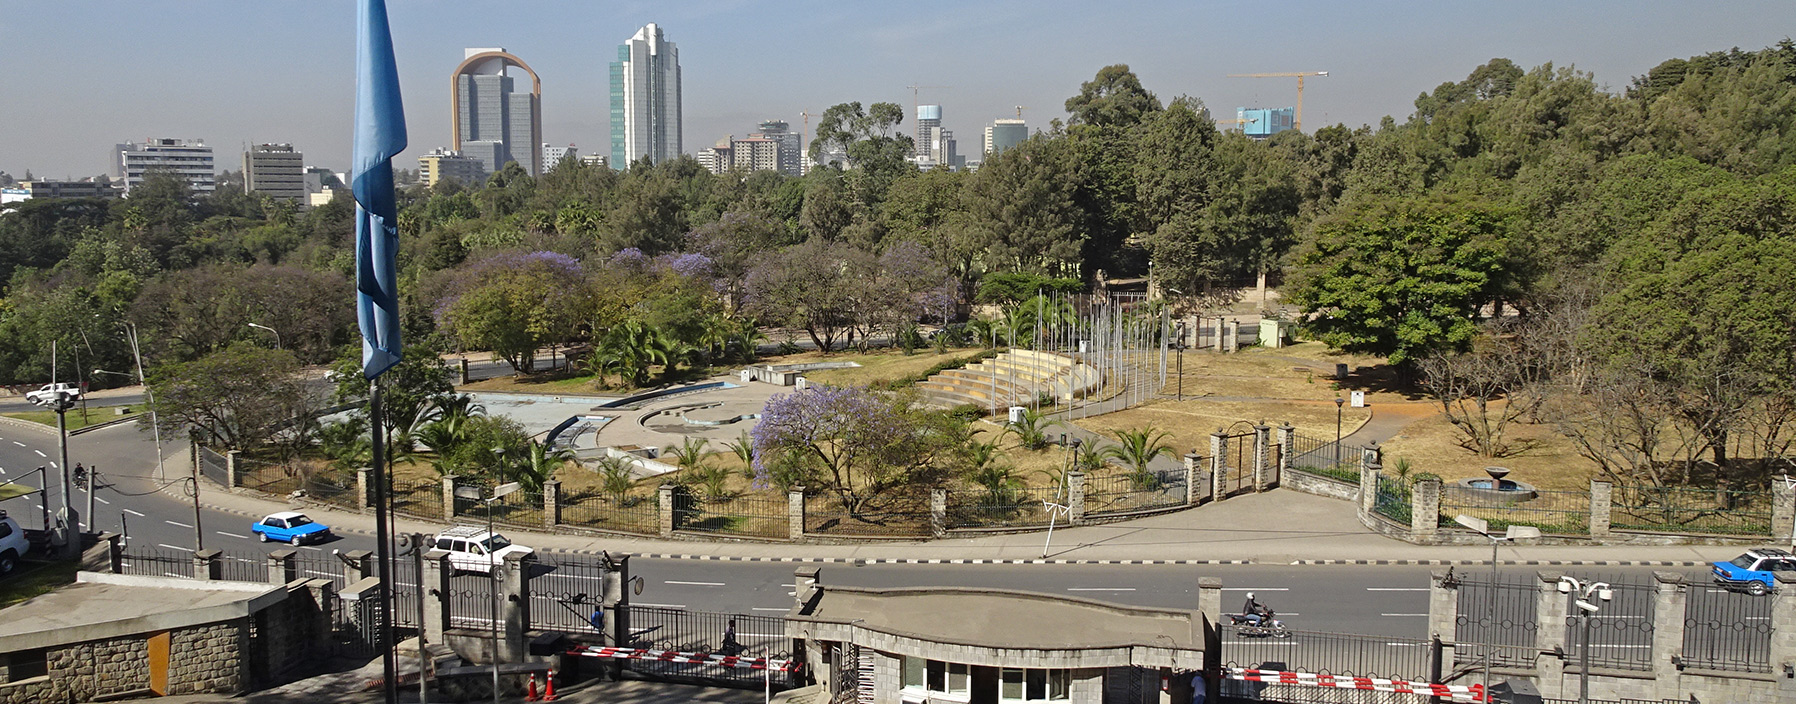 Photo of Addis Ababa, Ethiopia taken from the UN offices at ECA.